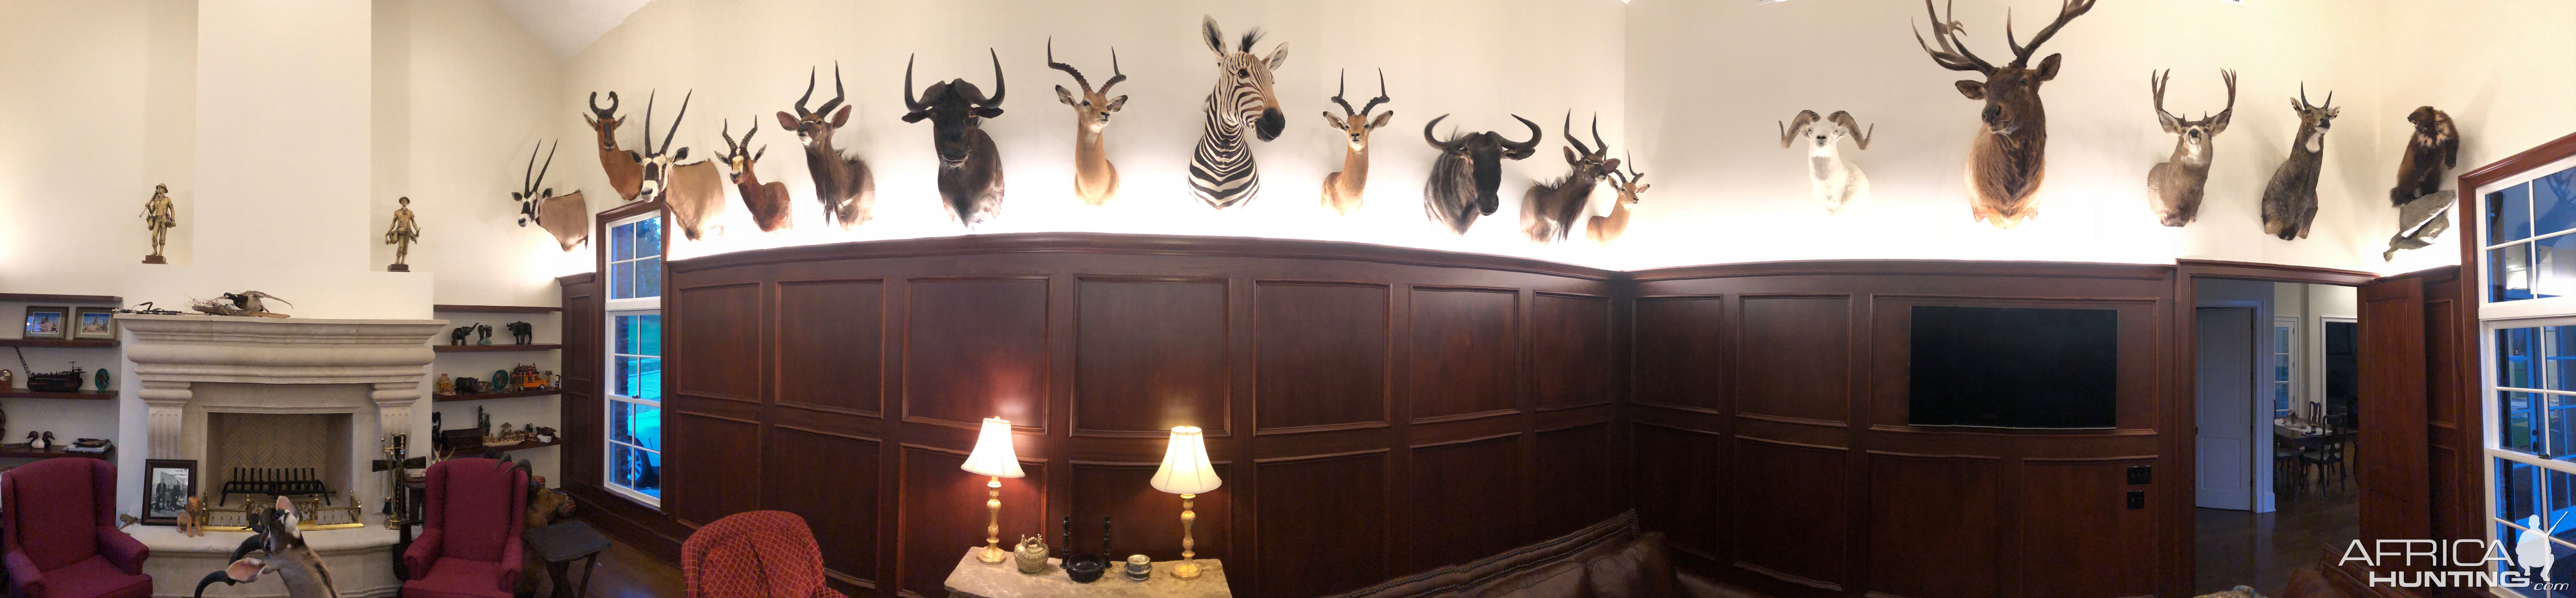 Panoramic of Trophy Room